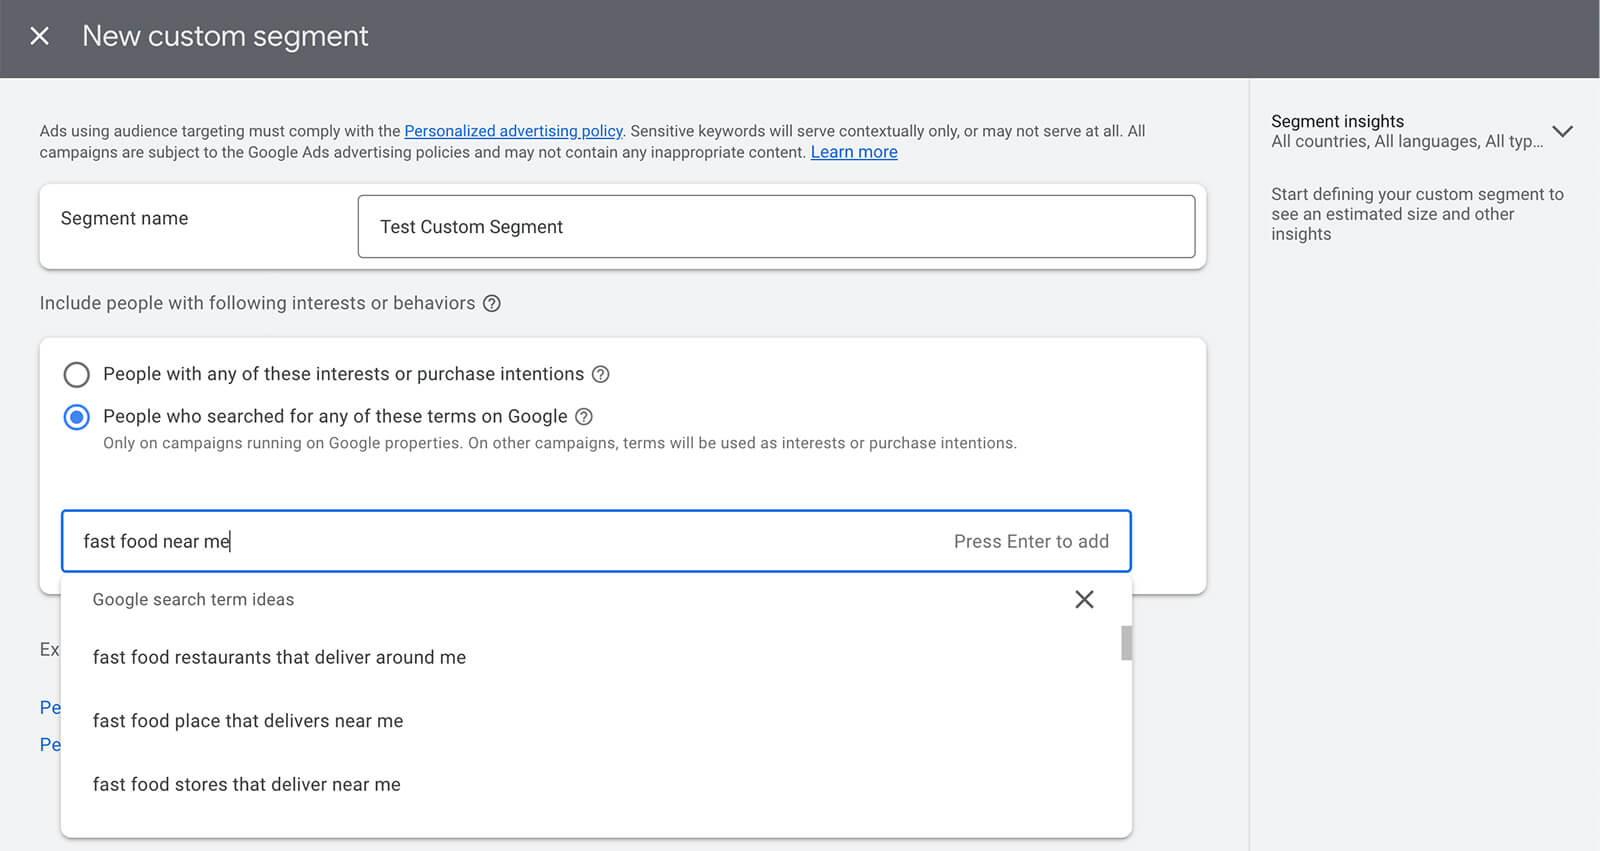 how-to-target-audiences-by-custom-segments-google-search-data-example-10